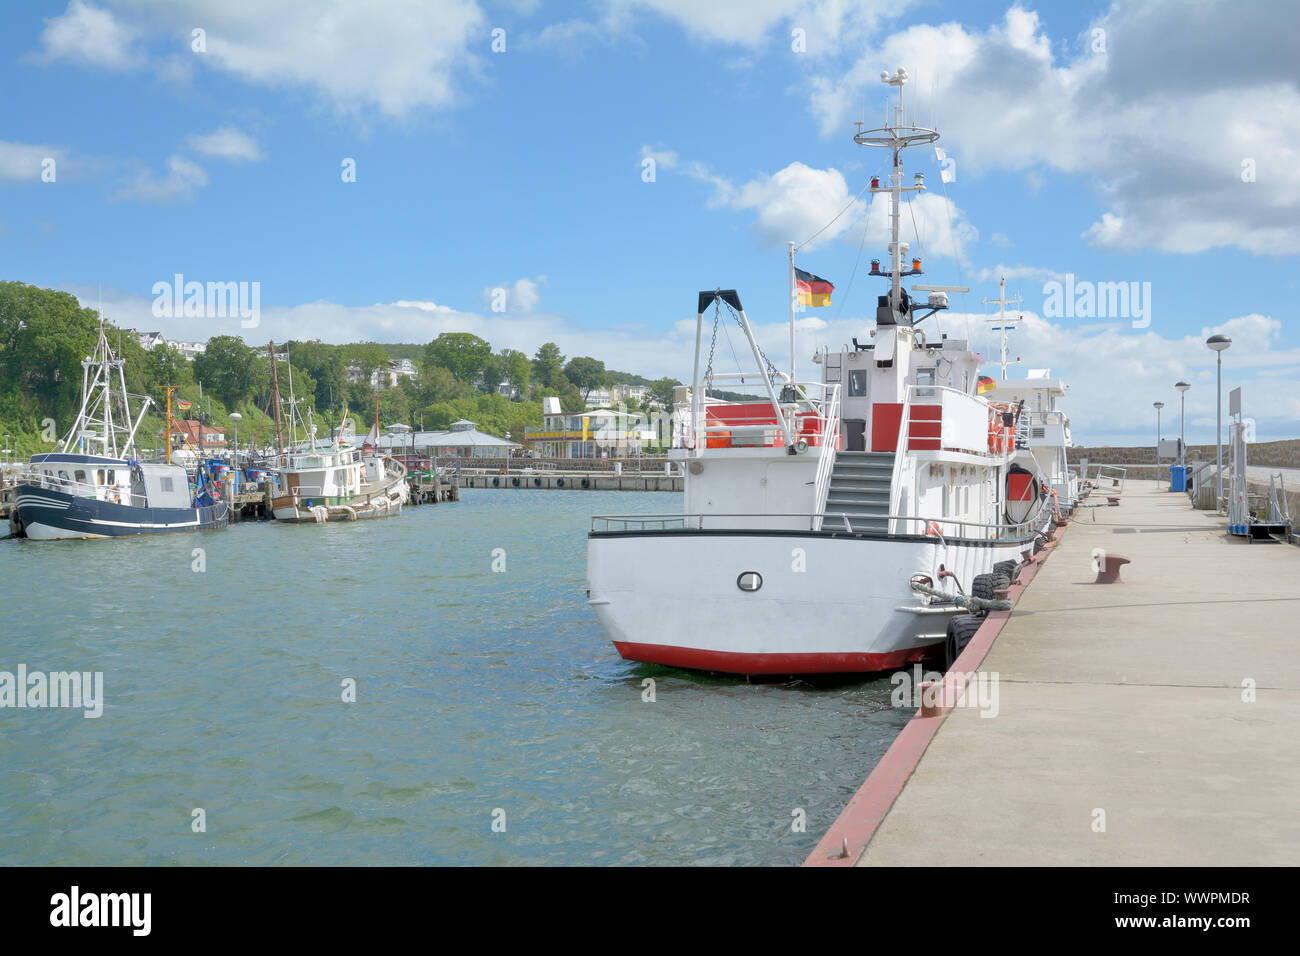 on the pier in the port of Sassnitz Stock Photo